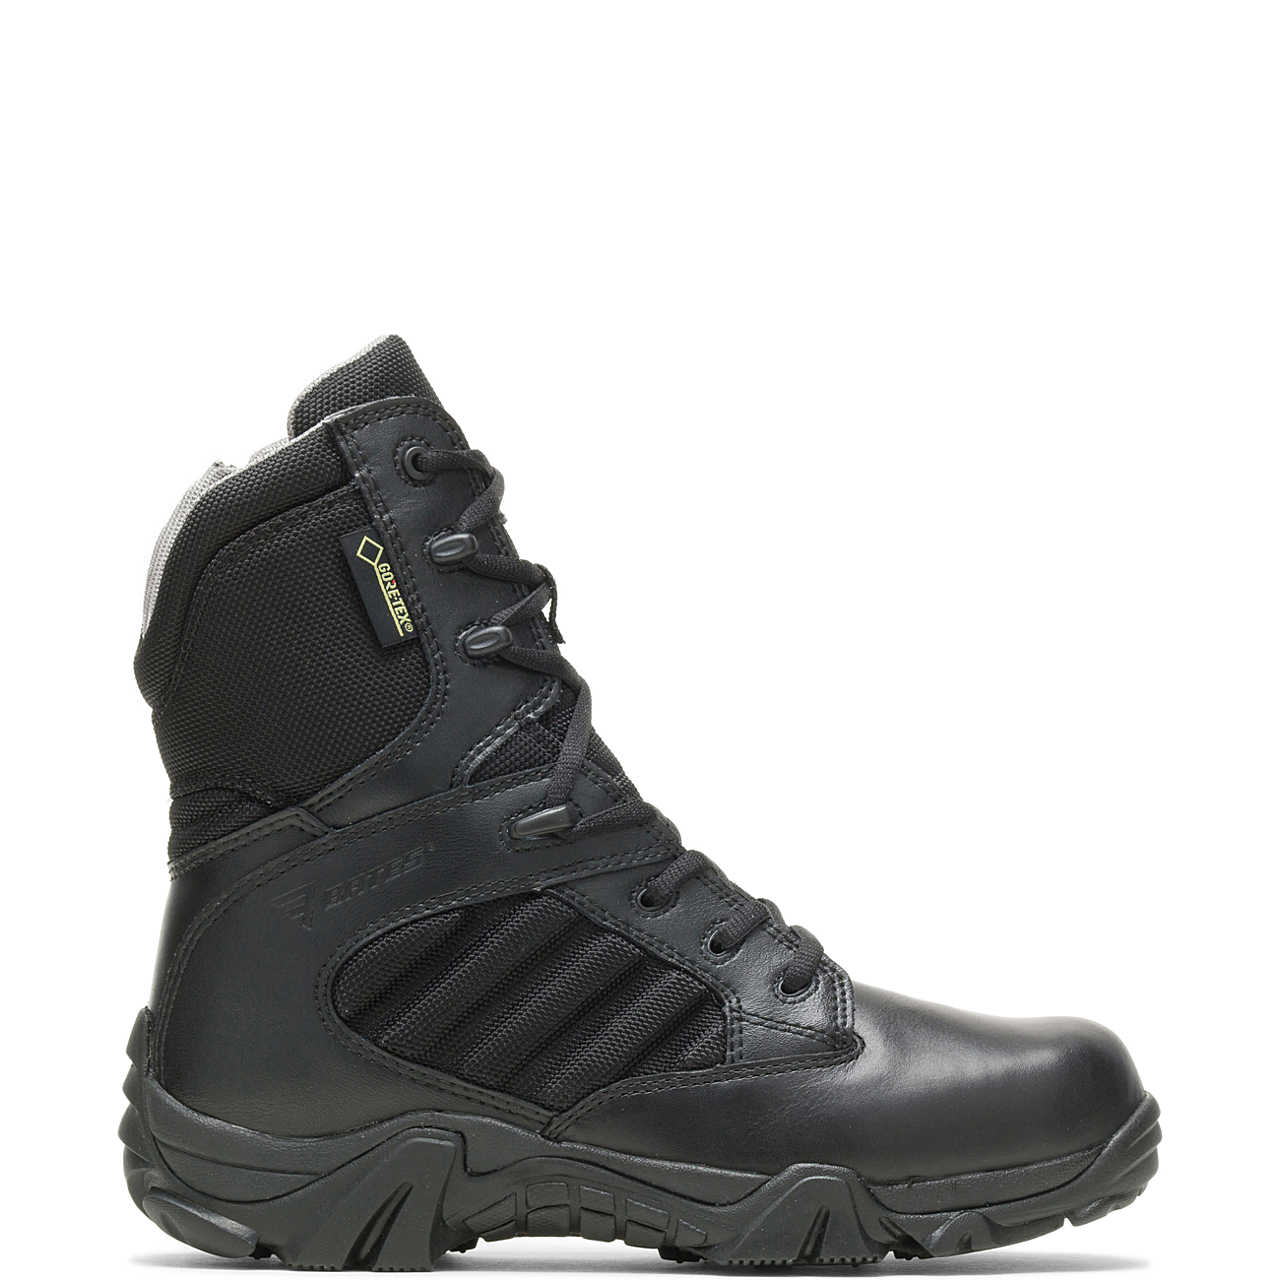 GX-8 Side Zip Boot with GORE-TEX® - Tactical